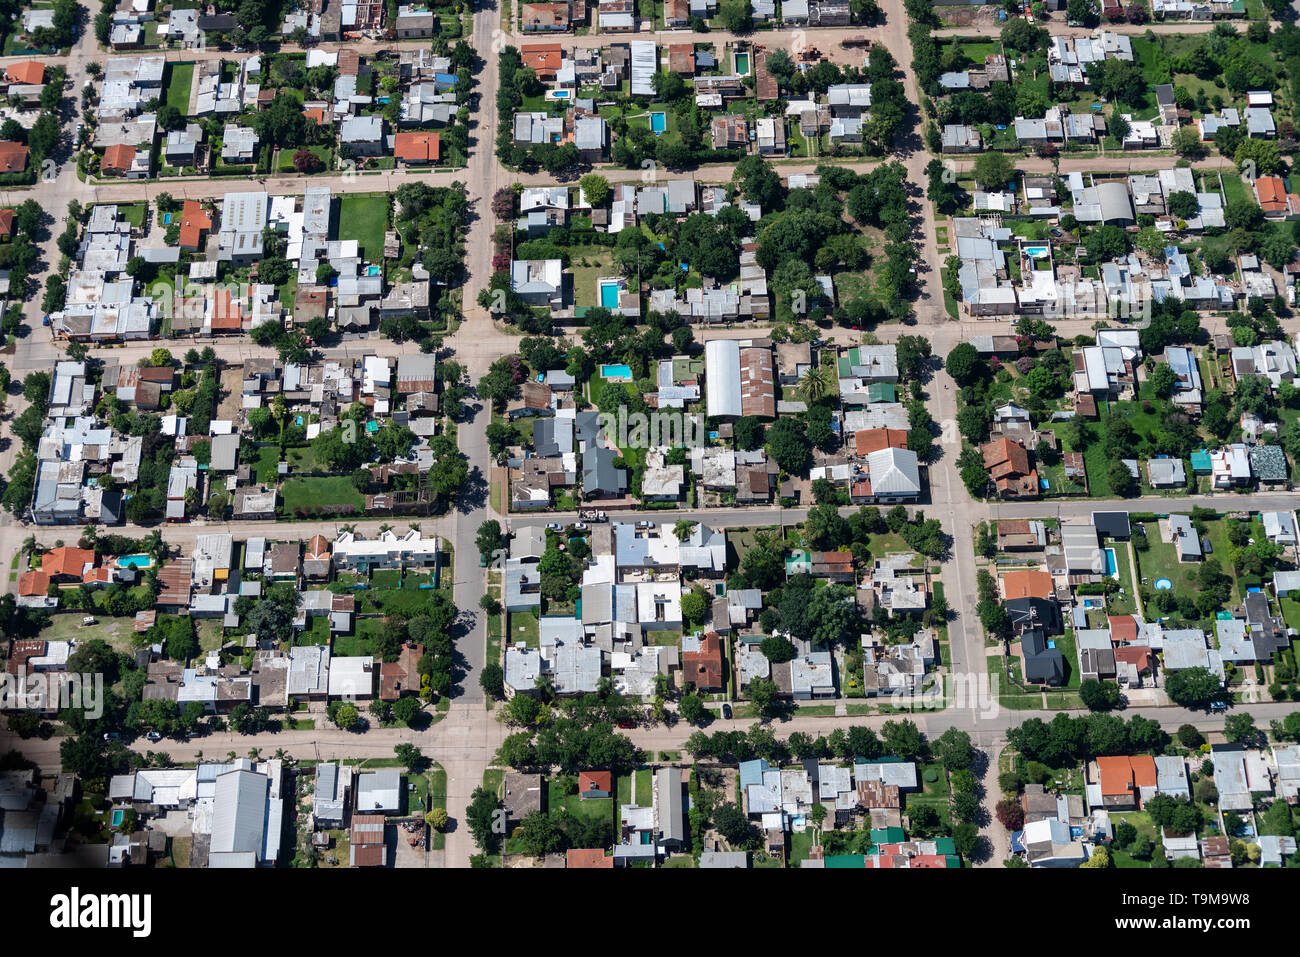 Aerial image showing neighbourhoods in the city of Rosario, Argentina Stock Photo